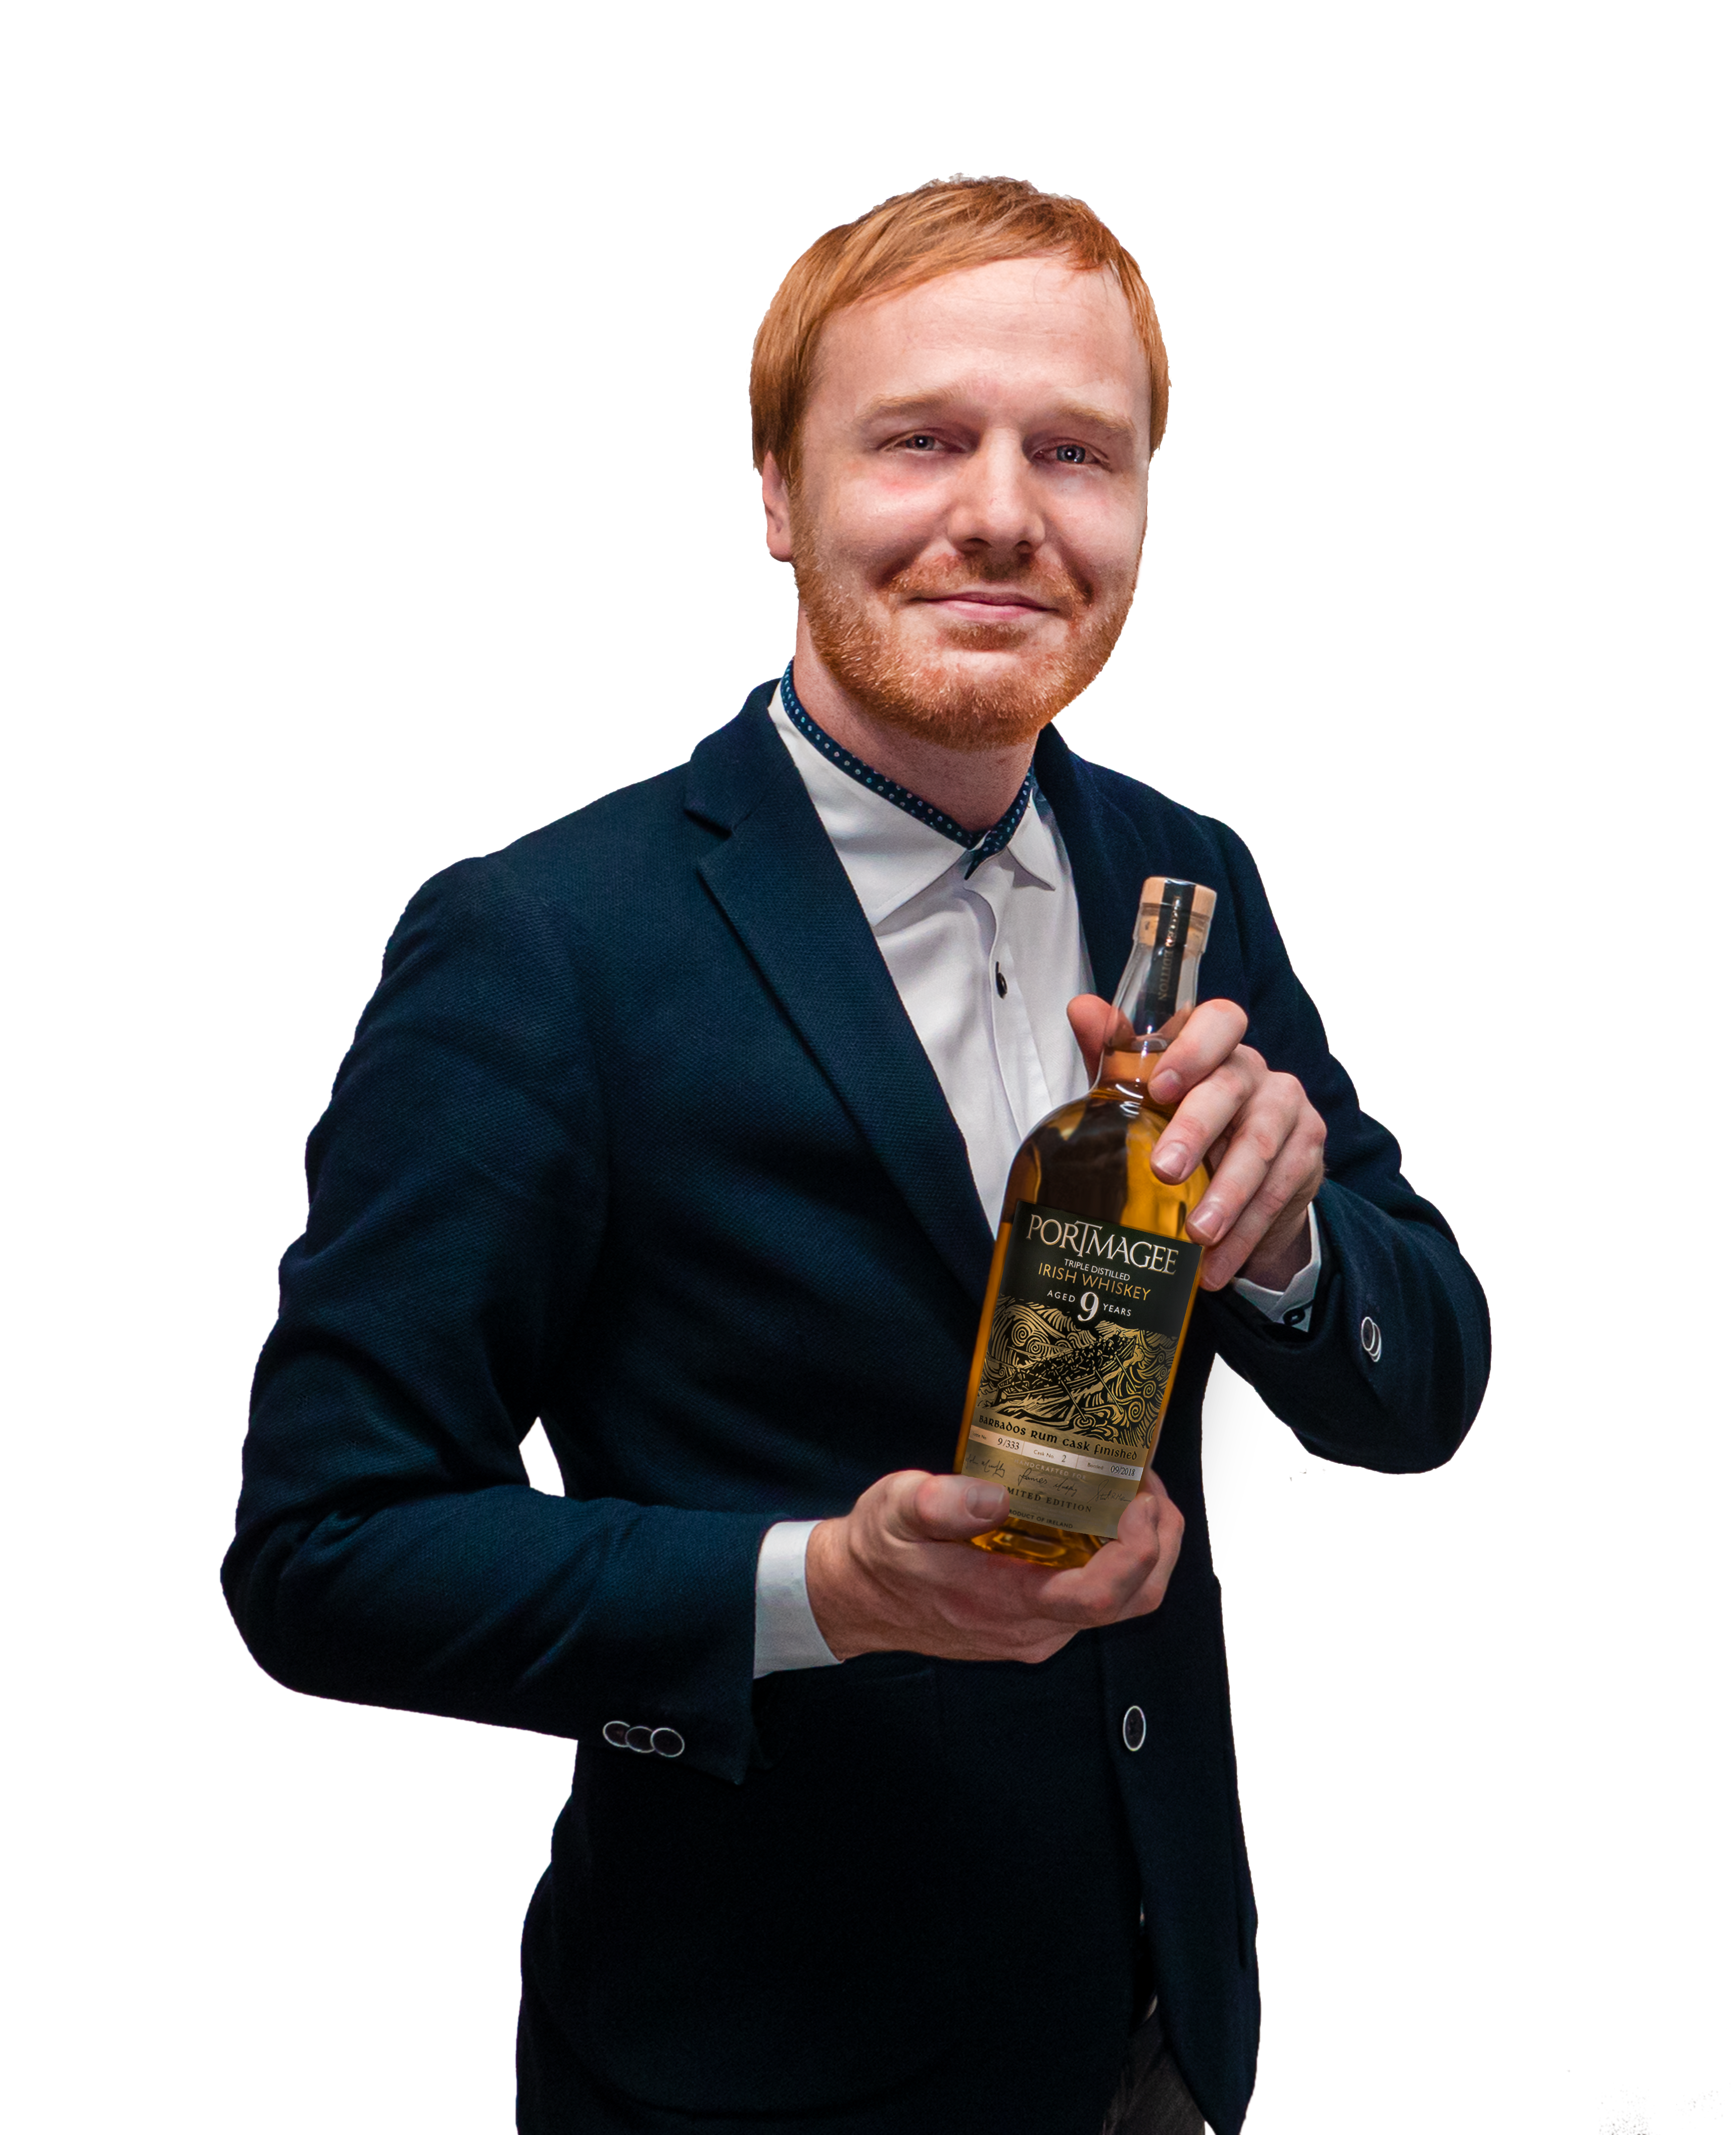 James-with-Portmagee-Whiskey-9YO_01